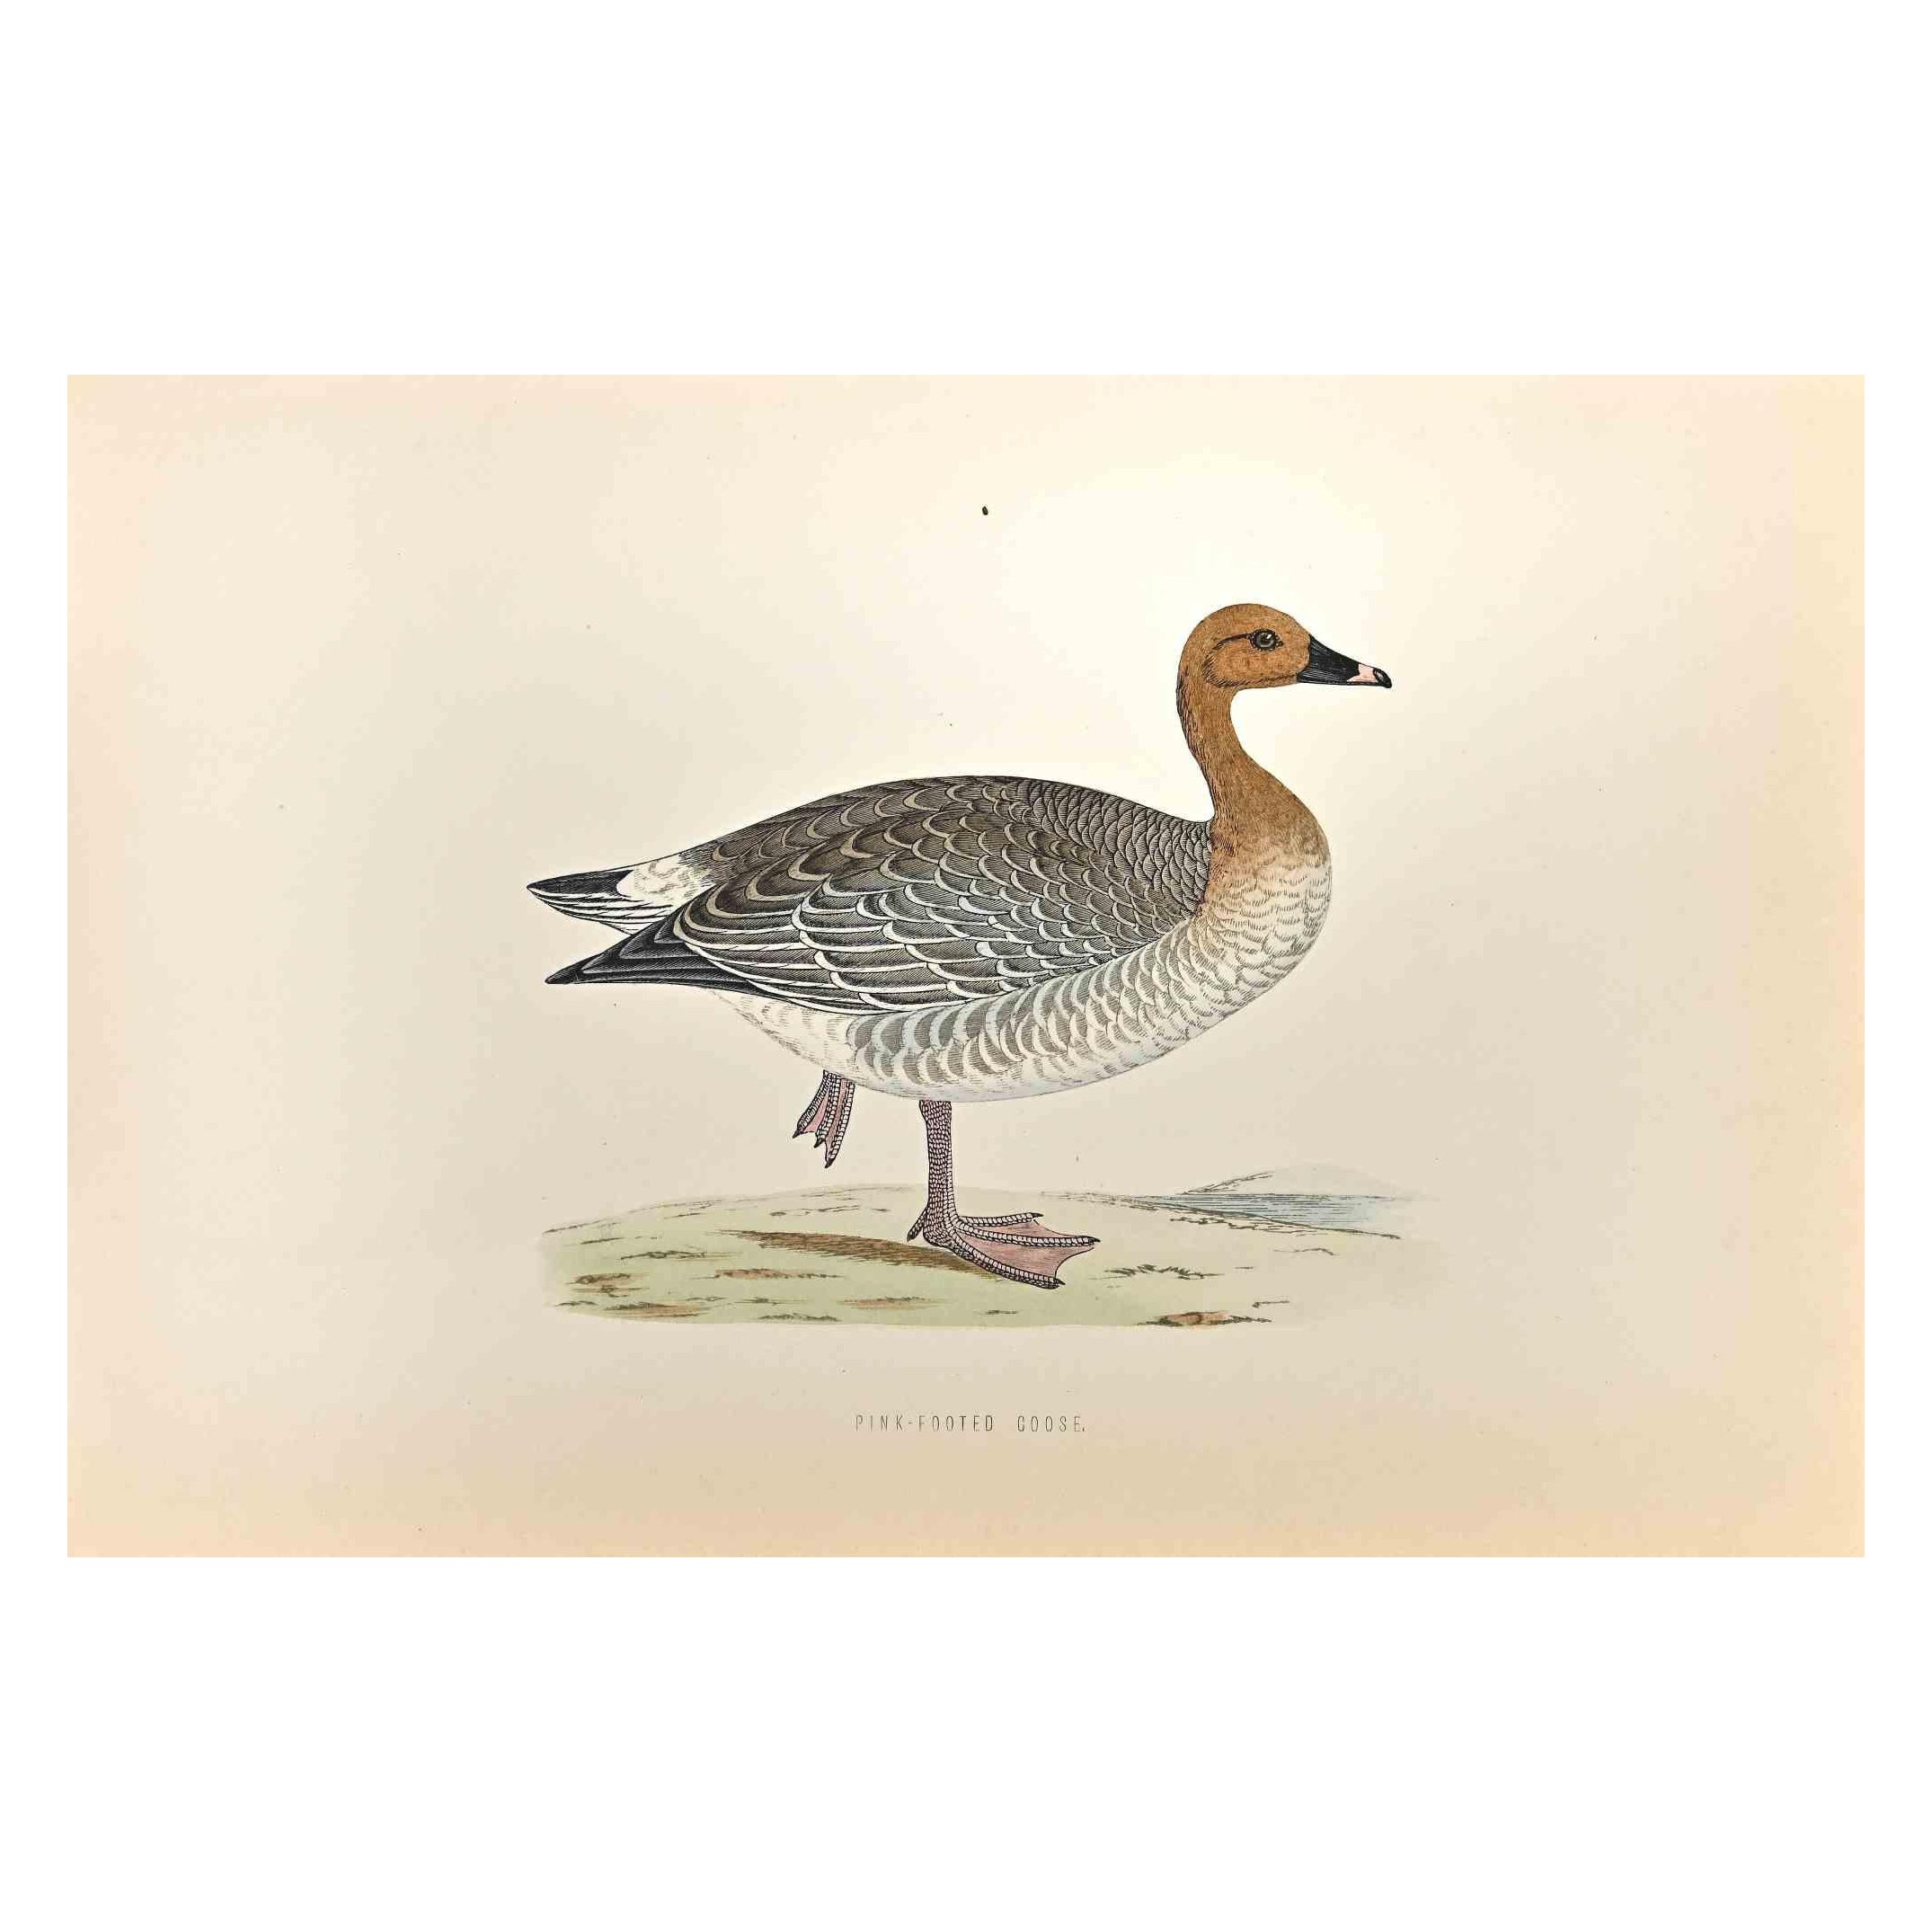 Pink-Footed Goose is a modern artwork realized in 1870 by the British artist Alexander Francis Lydon (1836-1917).

Woodcut print on ivory-colored paper.

Hand-colored, published by London, Bell & Sons, 1870.  

The name of the bird is printed on the